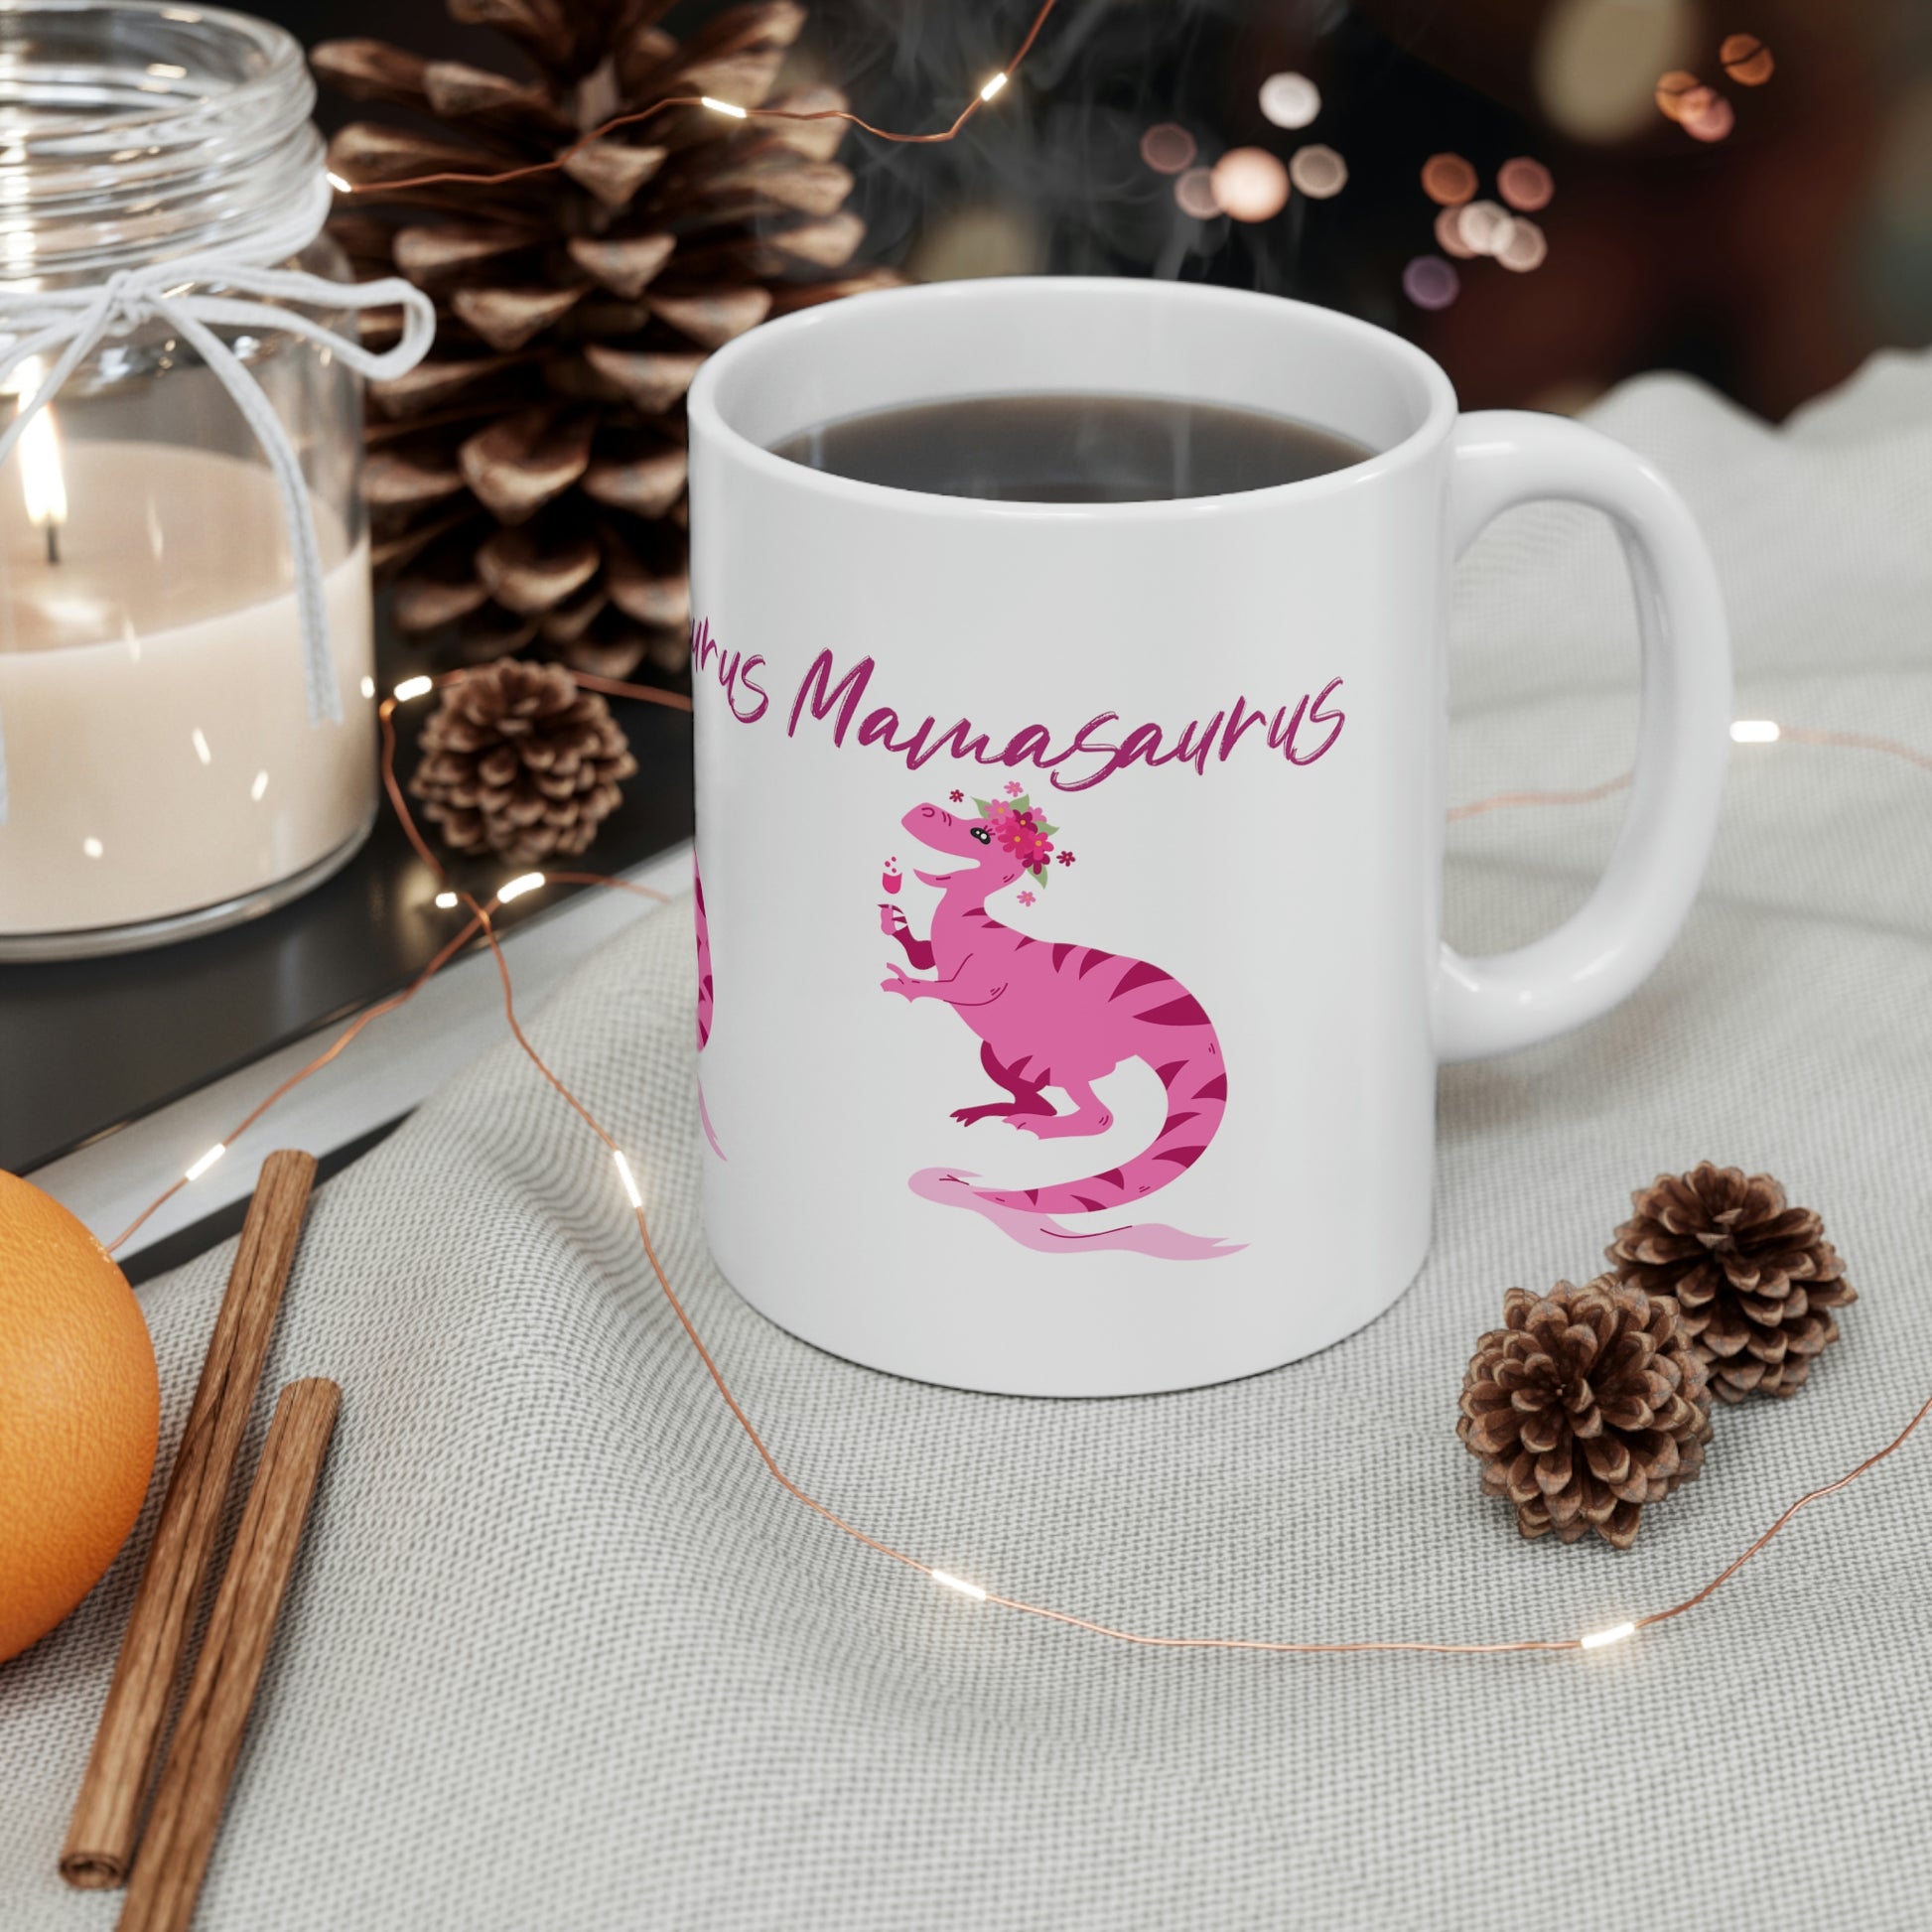 Mock up of the mug on a surface surrounded with pine cones and cinnamon sticks